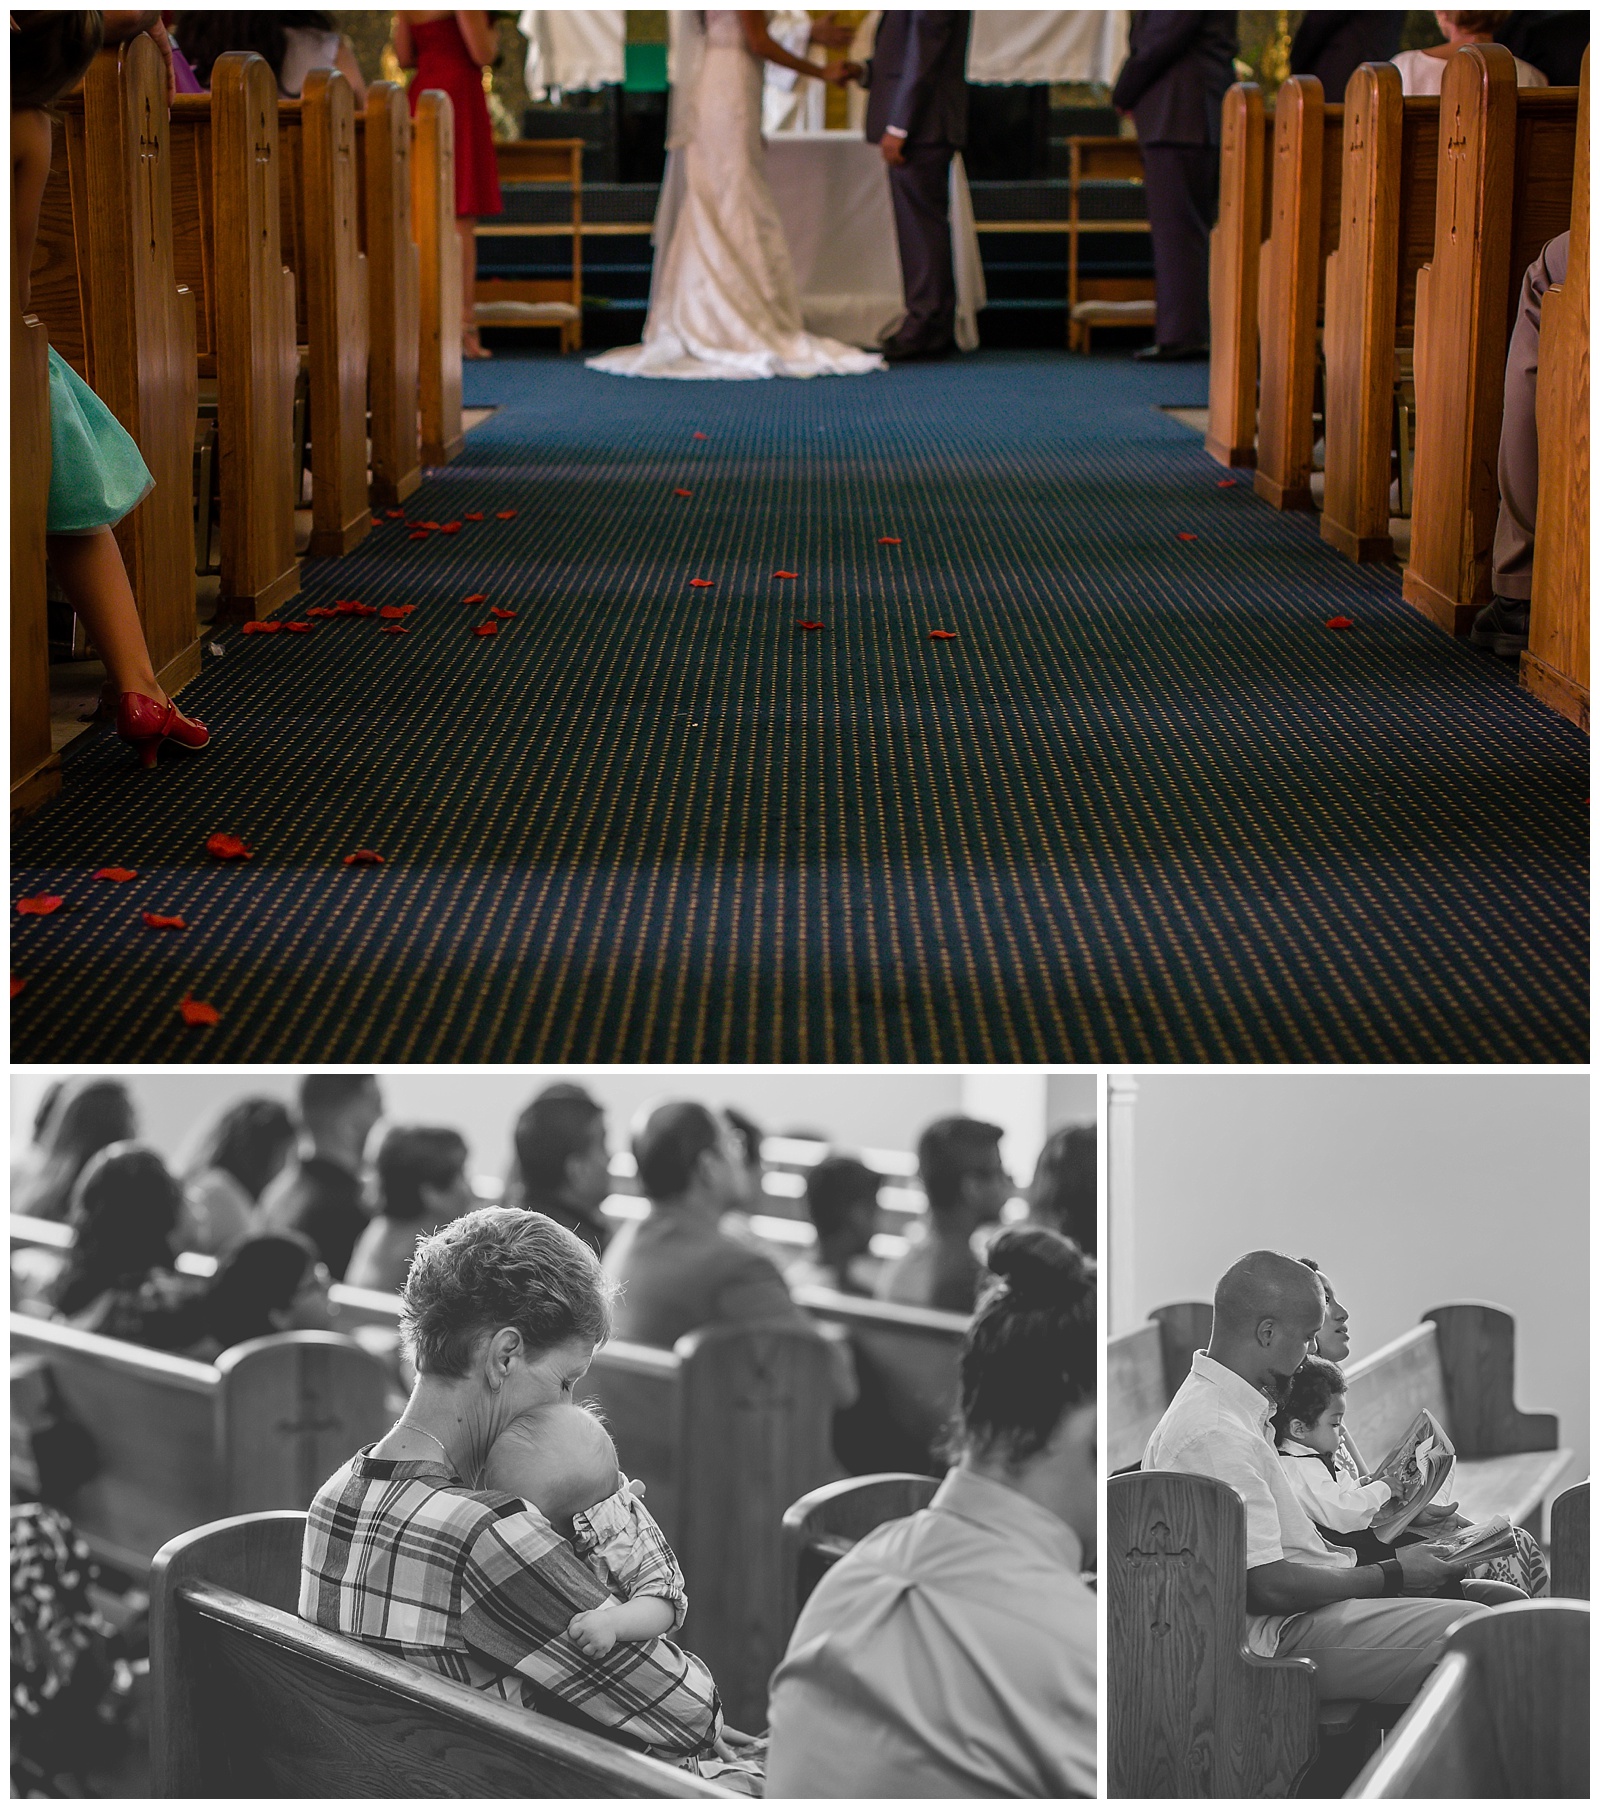 2016-09-1021.jpgWedding photography at Our Lady of Guadalupe Catholic Church in Topeka, Kansas.